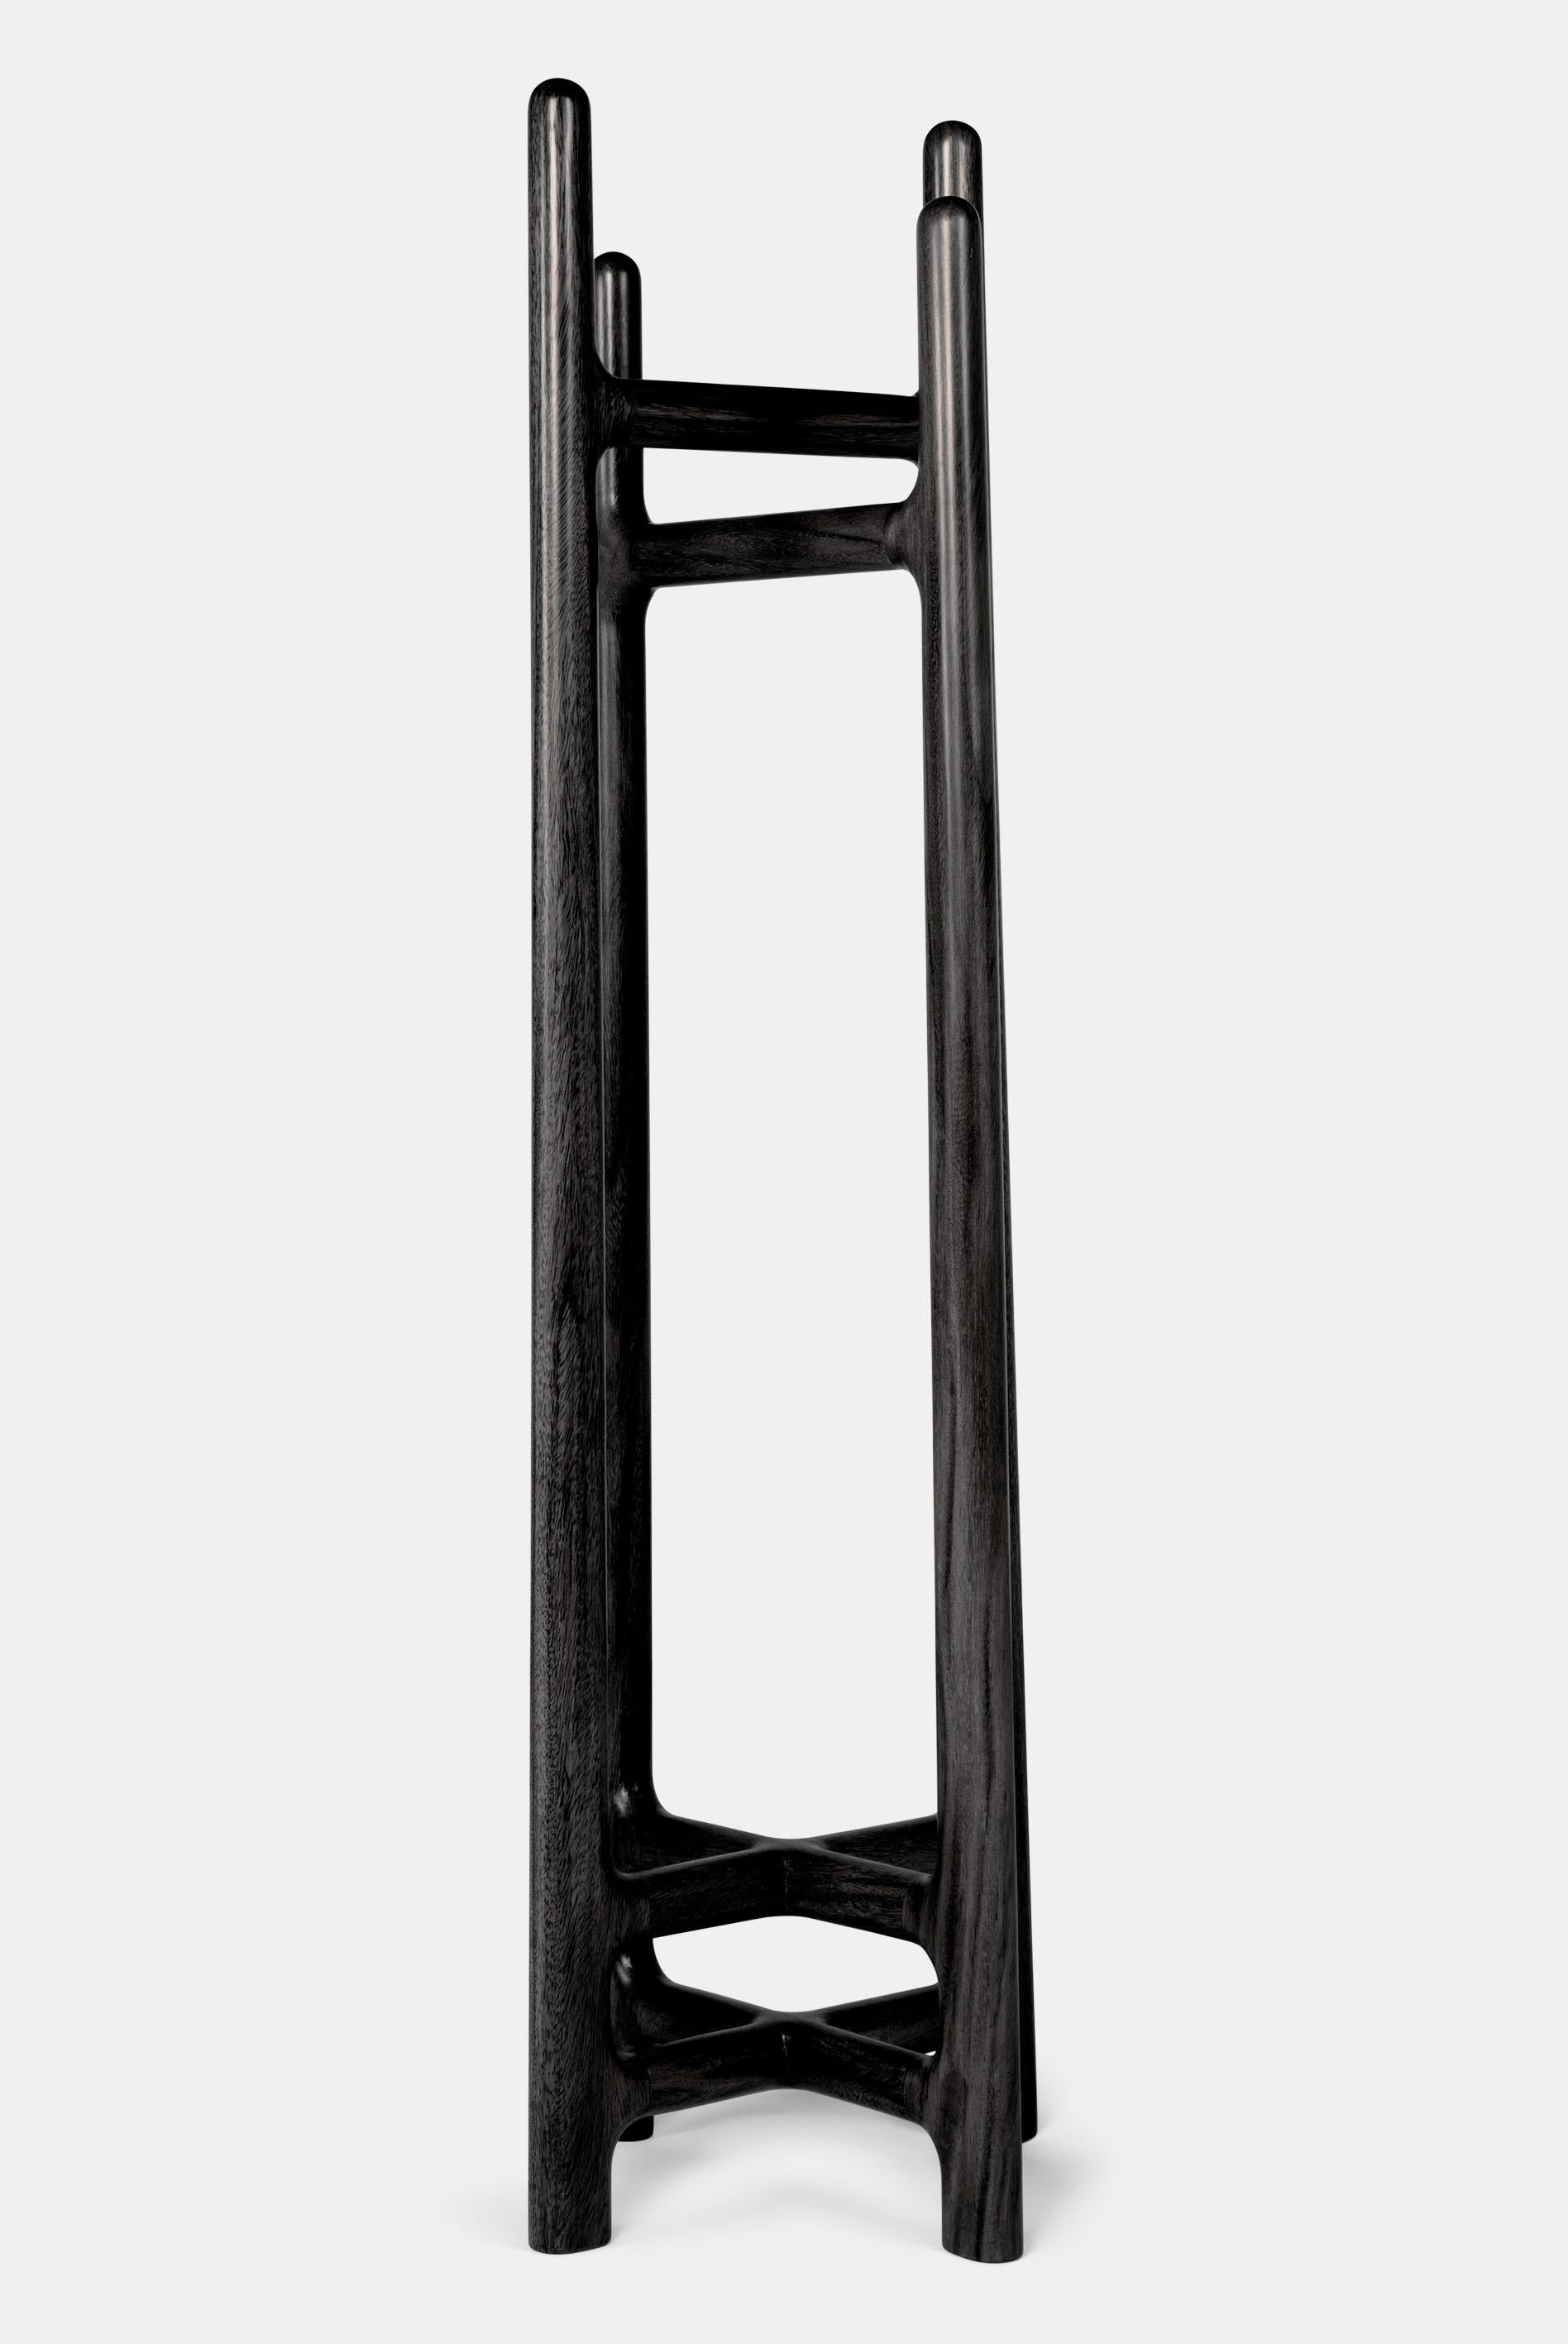 This stand-coat rack uses a contrasting intersection between its 4 legs, creating a unique and dynamic look that combined with premium solid hardwood makes a distinctive, elegant rack that will set the tone of your home when it’s in use or not.